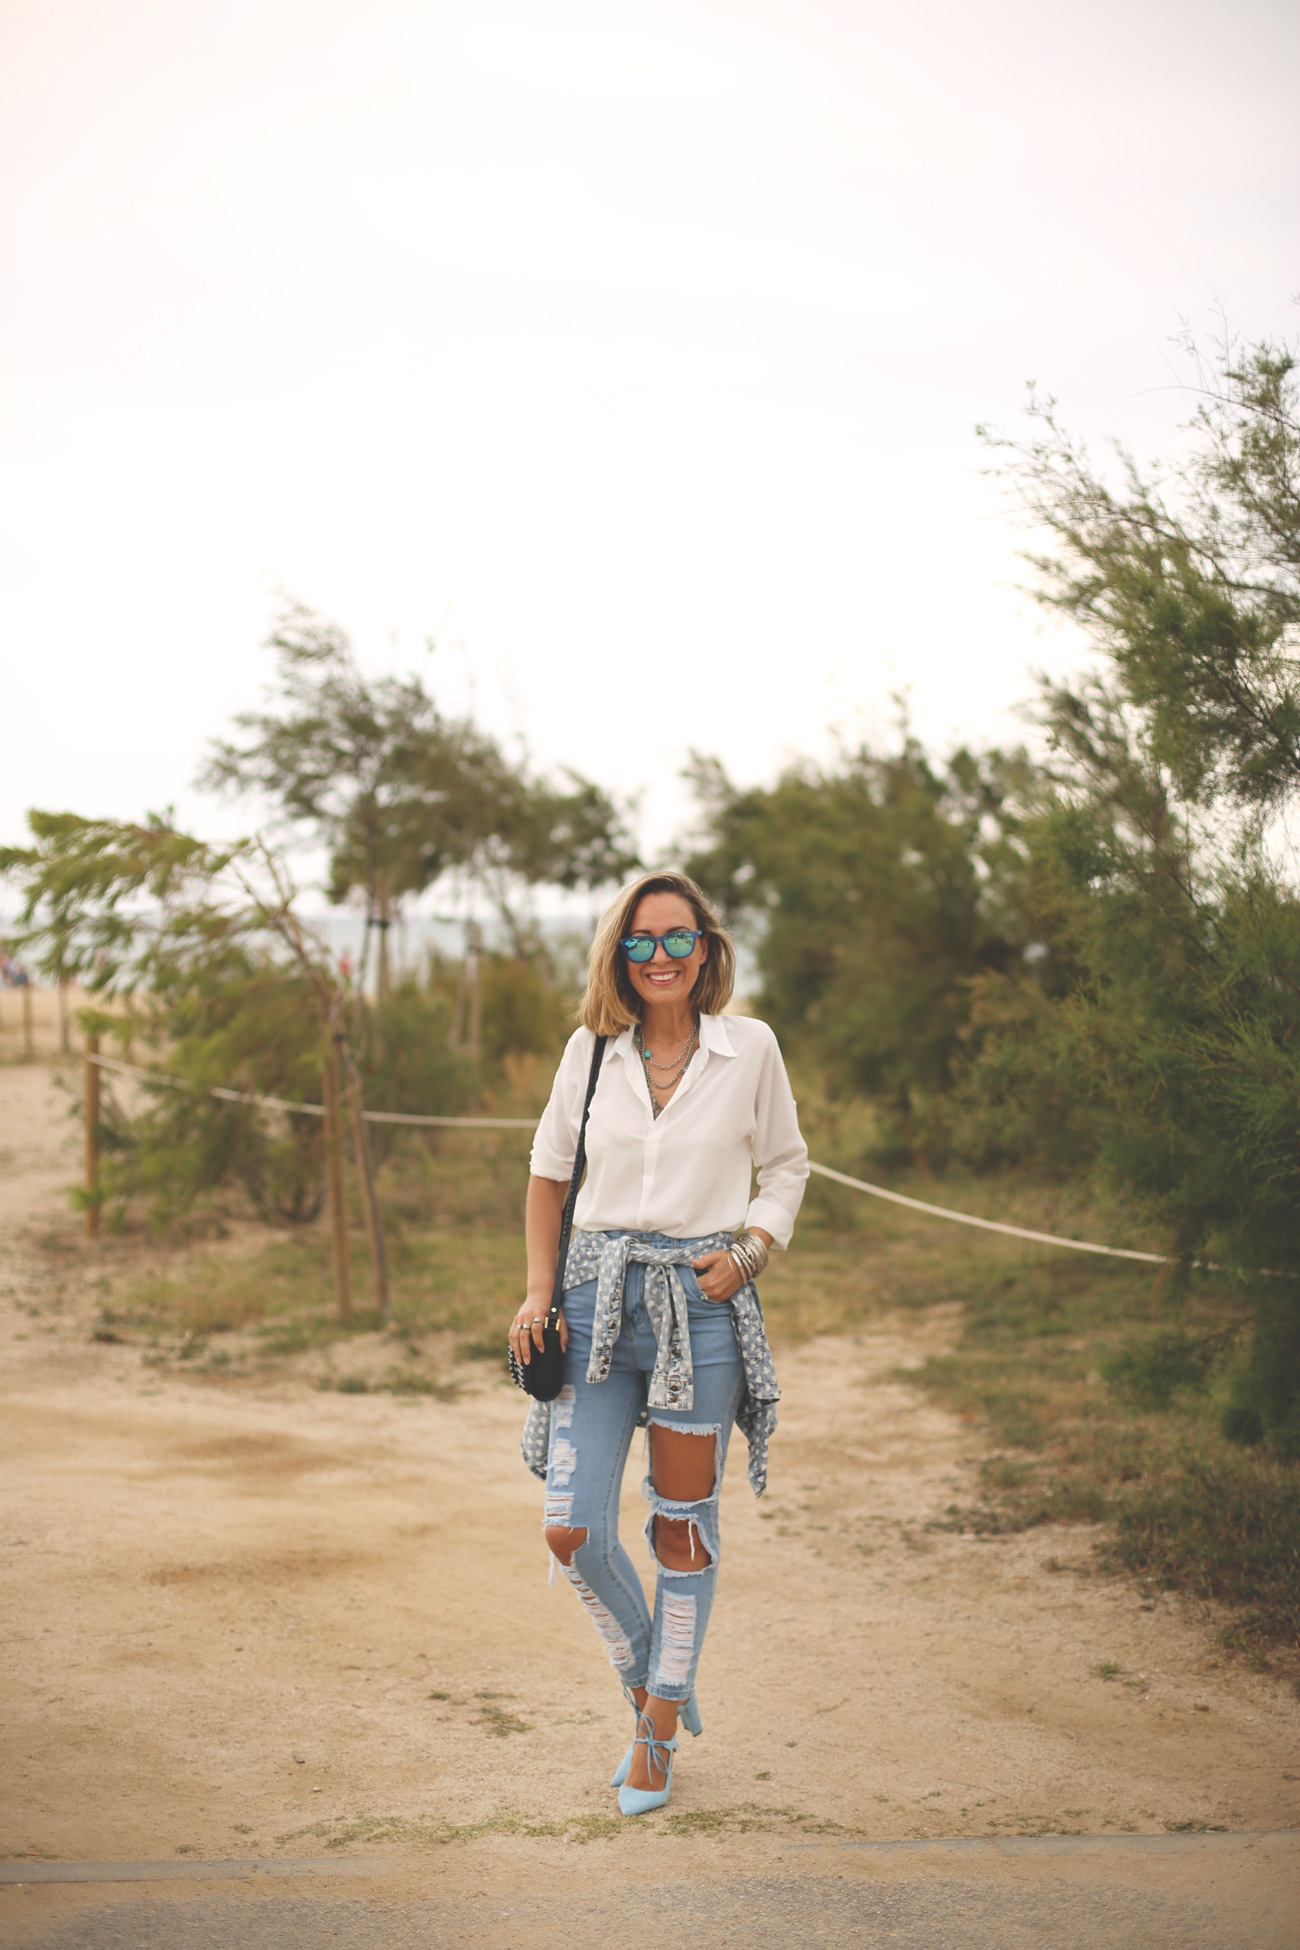 Mum Jeans, ripped jeans, white shirt, silver jewelry, baby blue heels, mirror sunglasses, blackguard 64